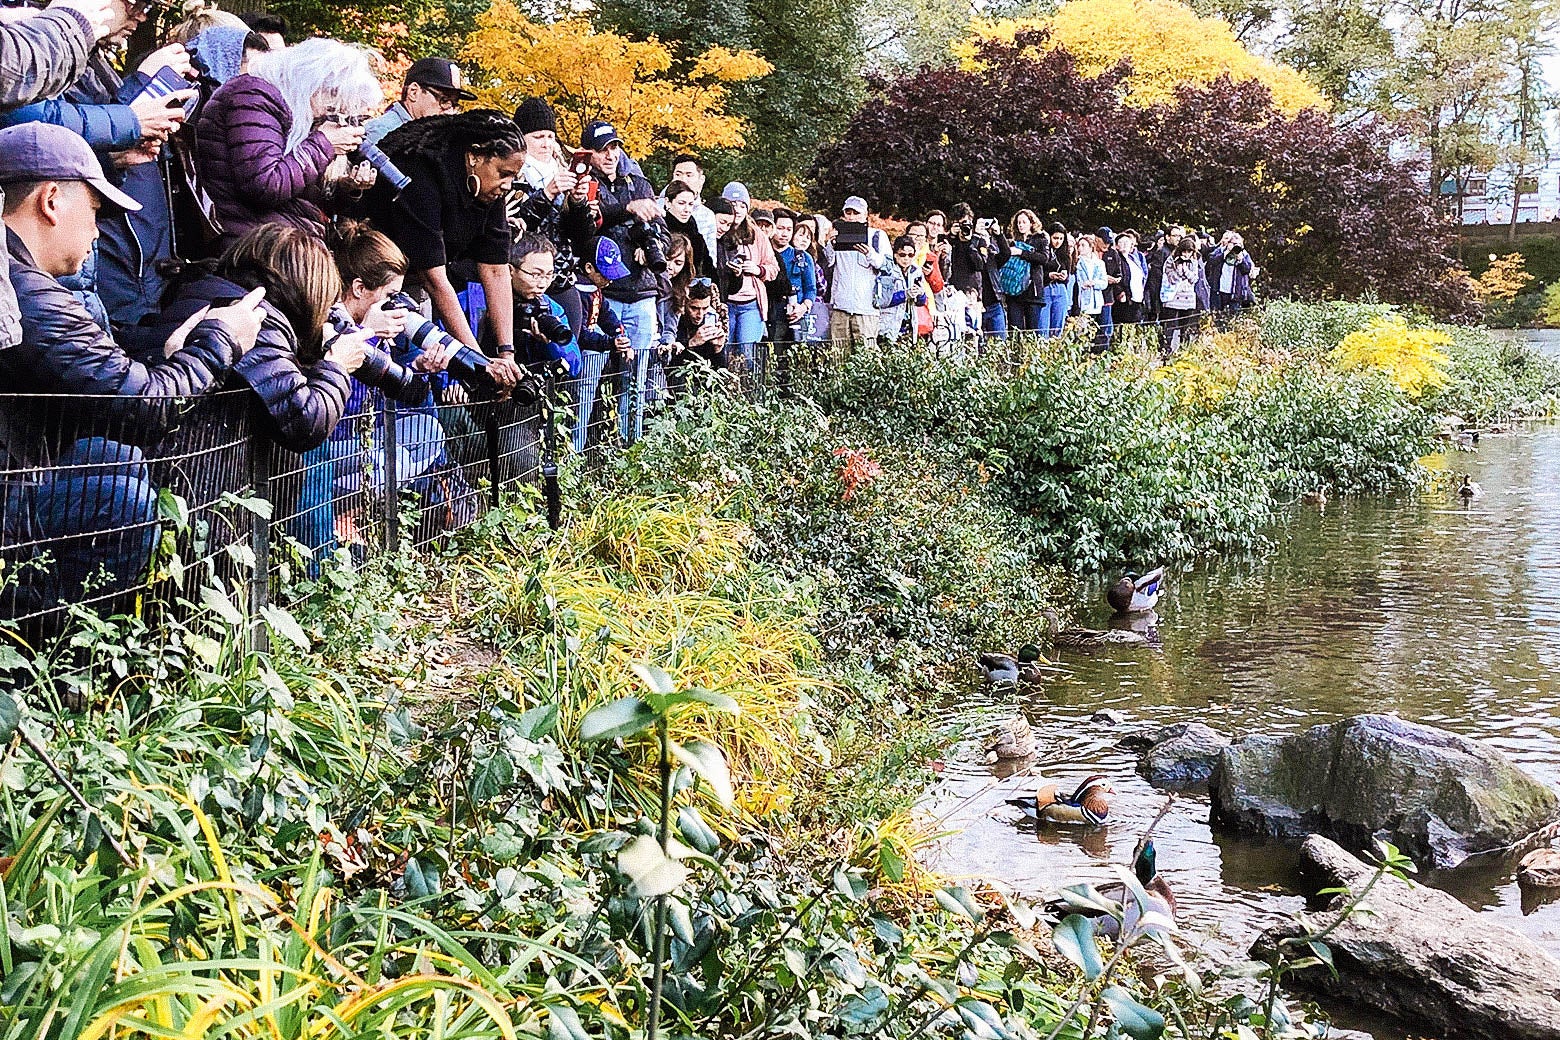 A crowd of people gathered to observe the mandarin duck in Central Park.